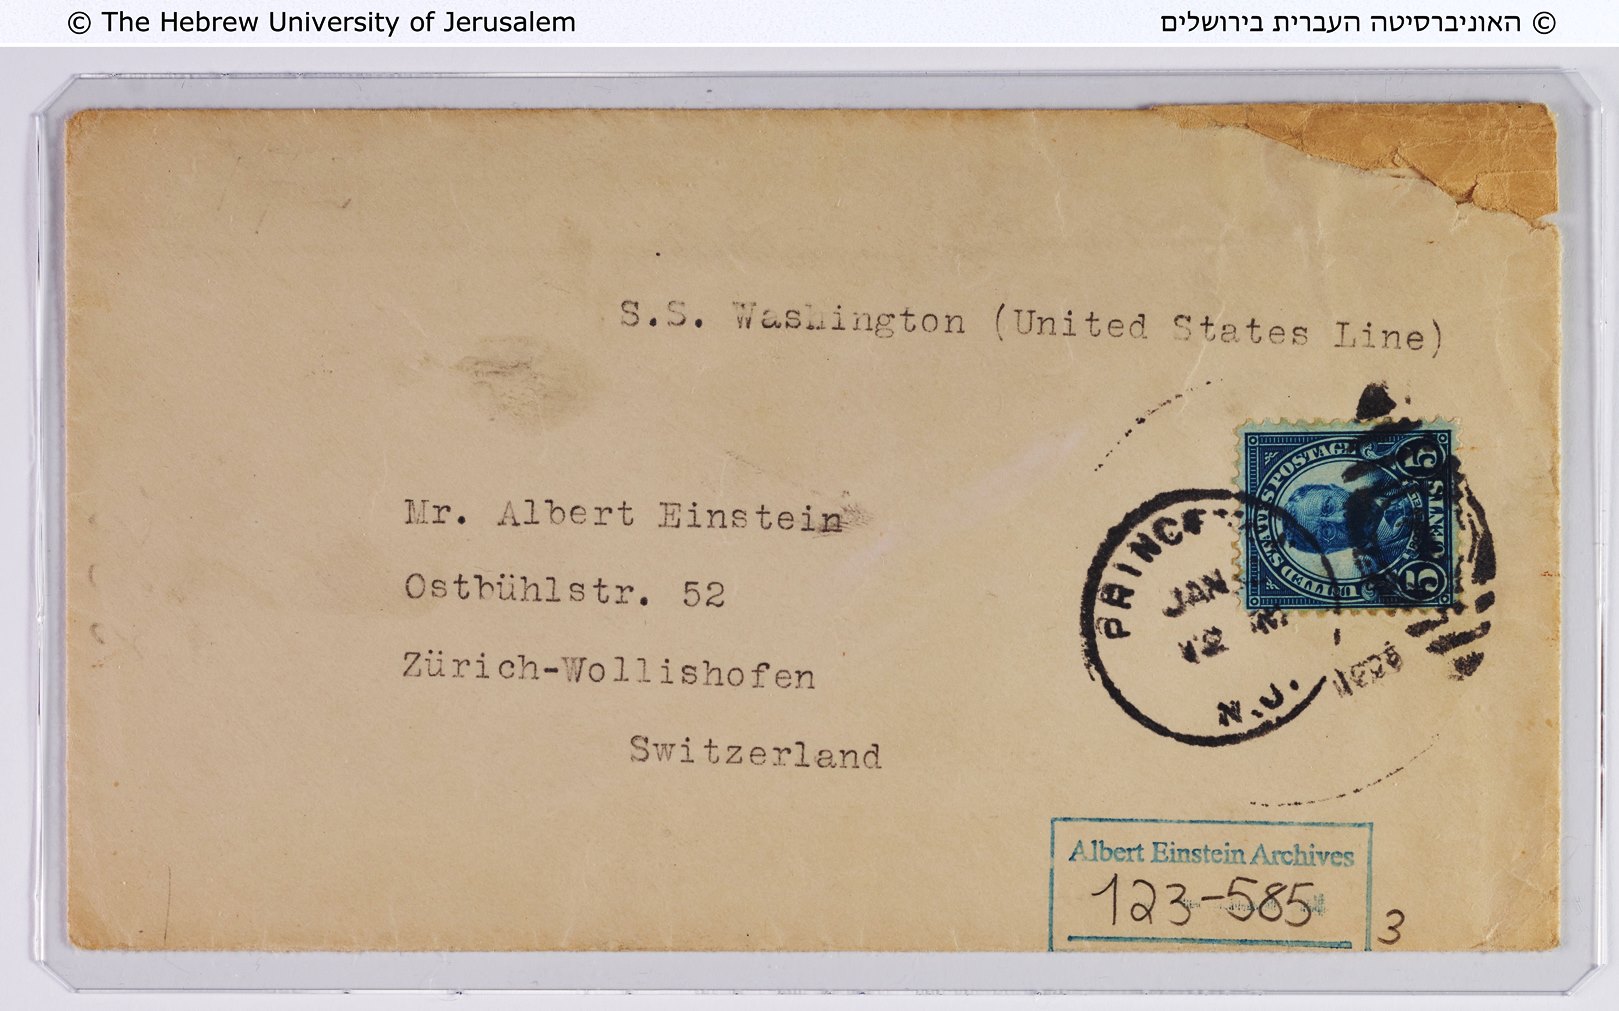 One of the newly discovered items added to the Albert Einstein Archives in March 2019. Photo by Ardon Bar Hama, Albert Einstein Archives/Hebrew University